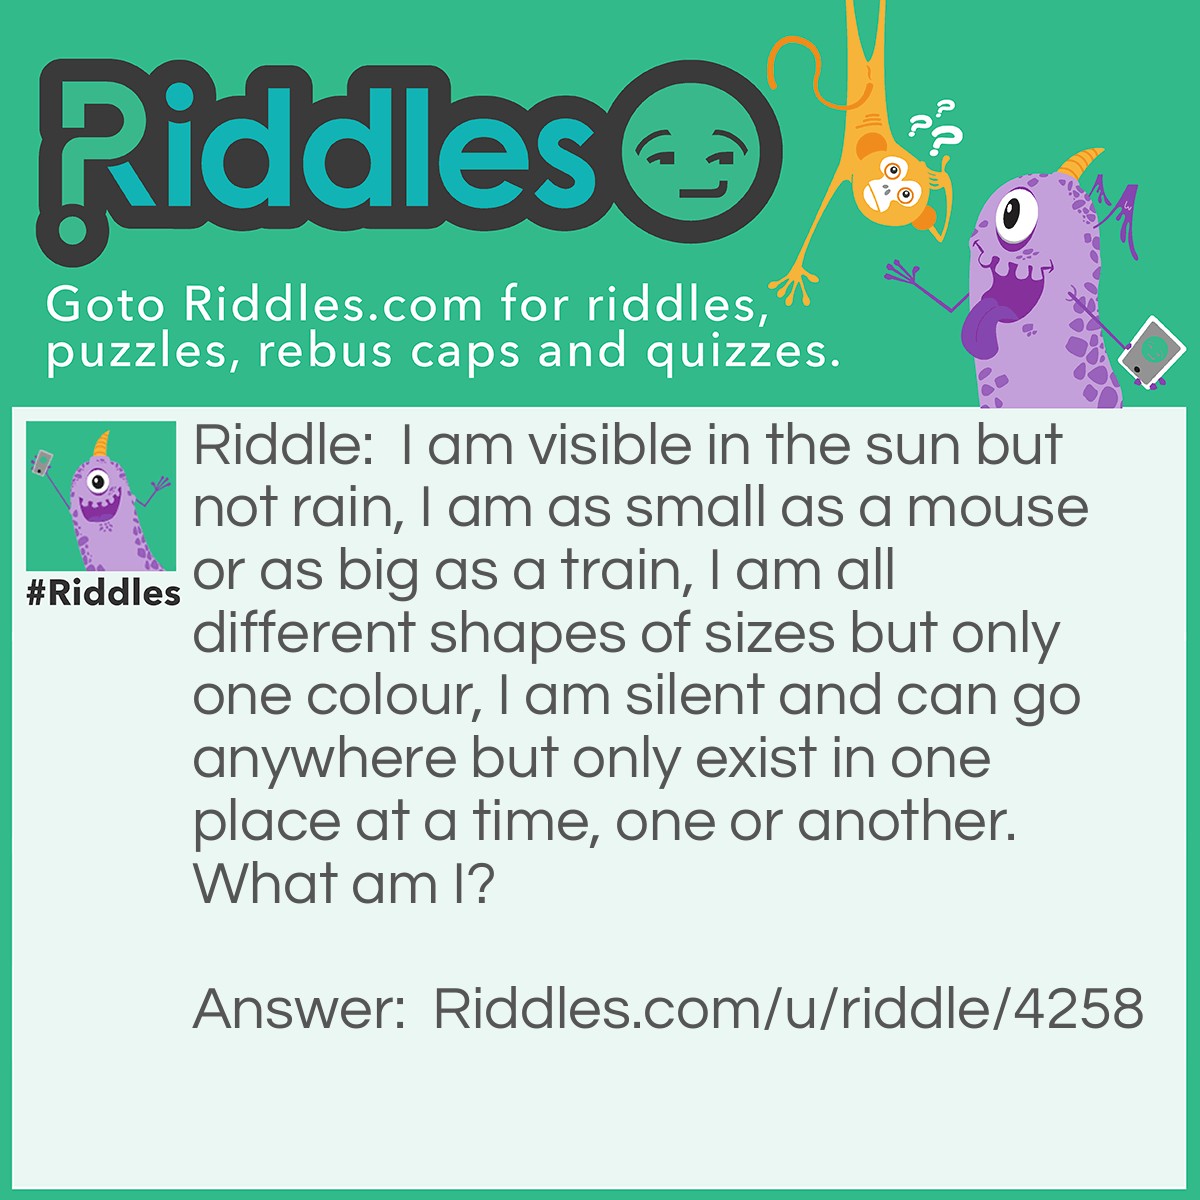 Riddle: I am visible in the sun but not rain, I am as small as a mouse or as big as a train, I am all different shapes of sizes but only one colour, I am silent and can go anywhere but only exist in one place at a time, one or another. What am I? Answer: A shadow!